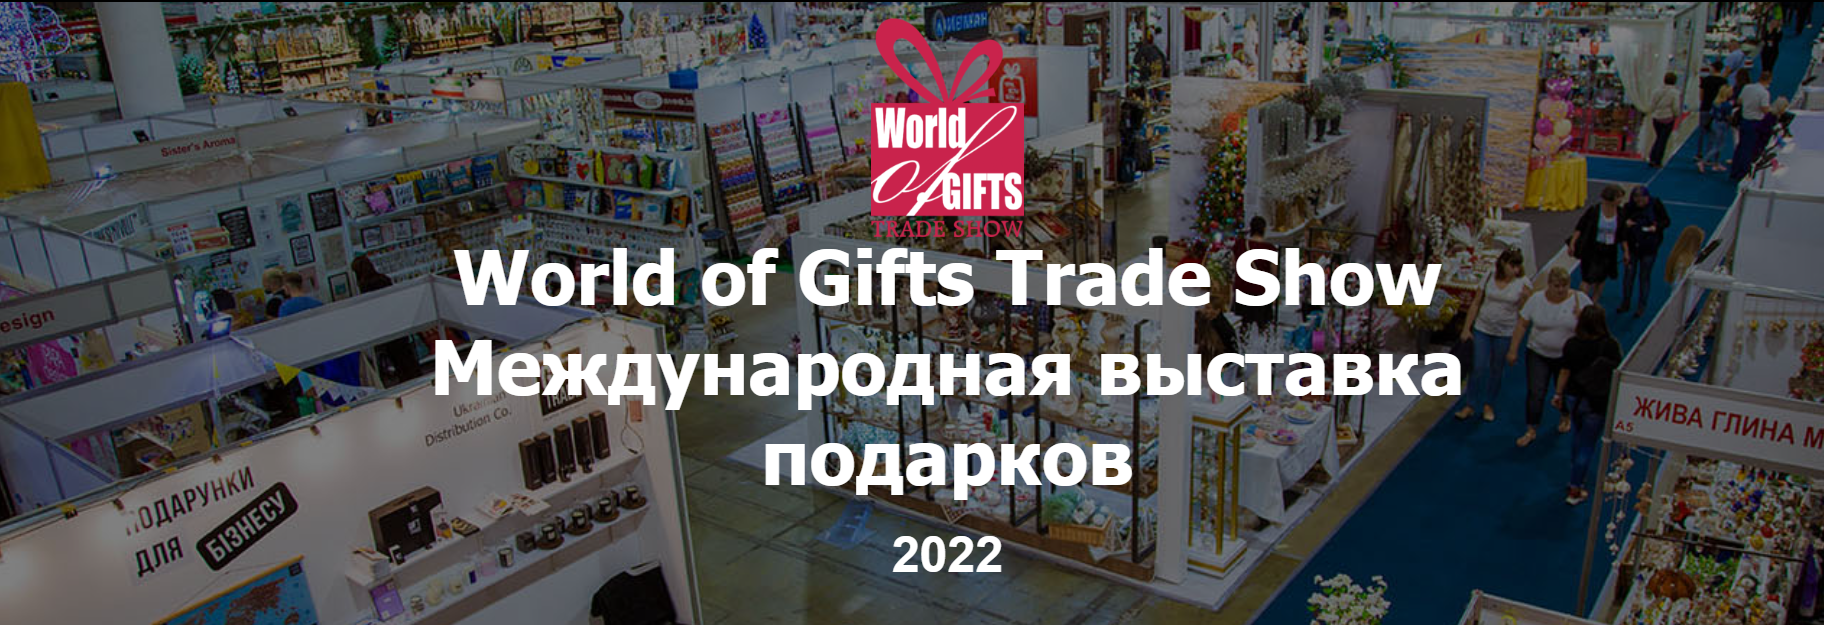 World of Gifts Trade Show 2022